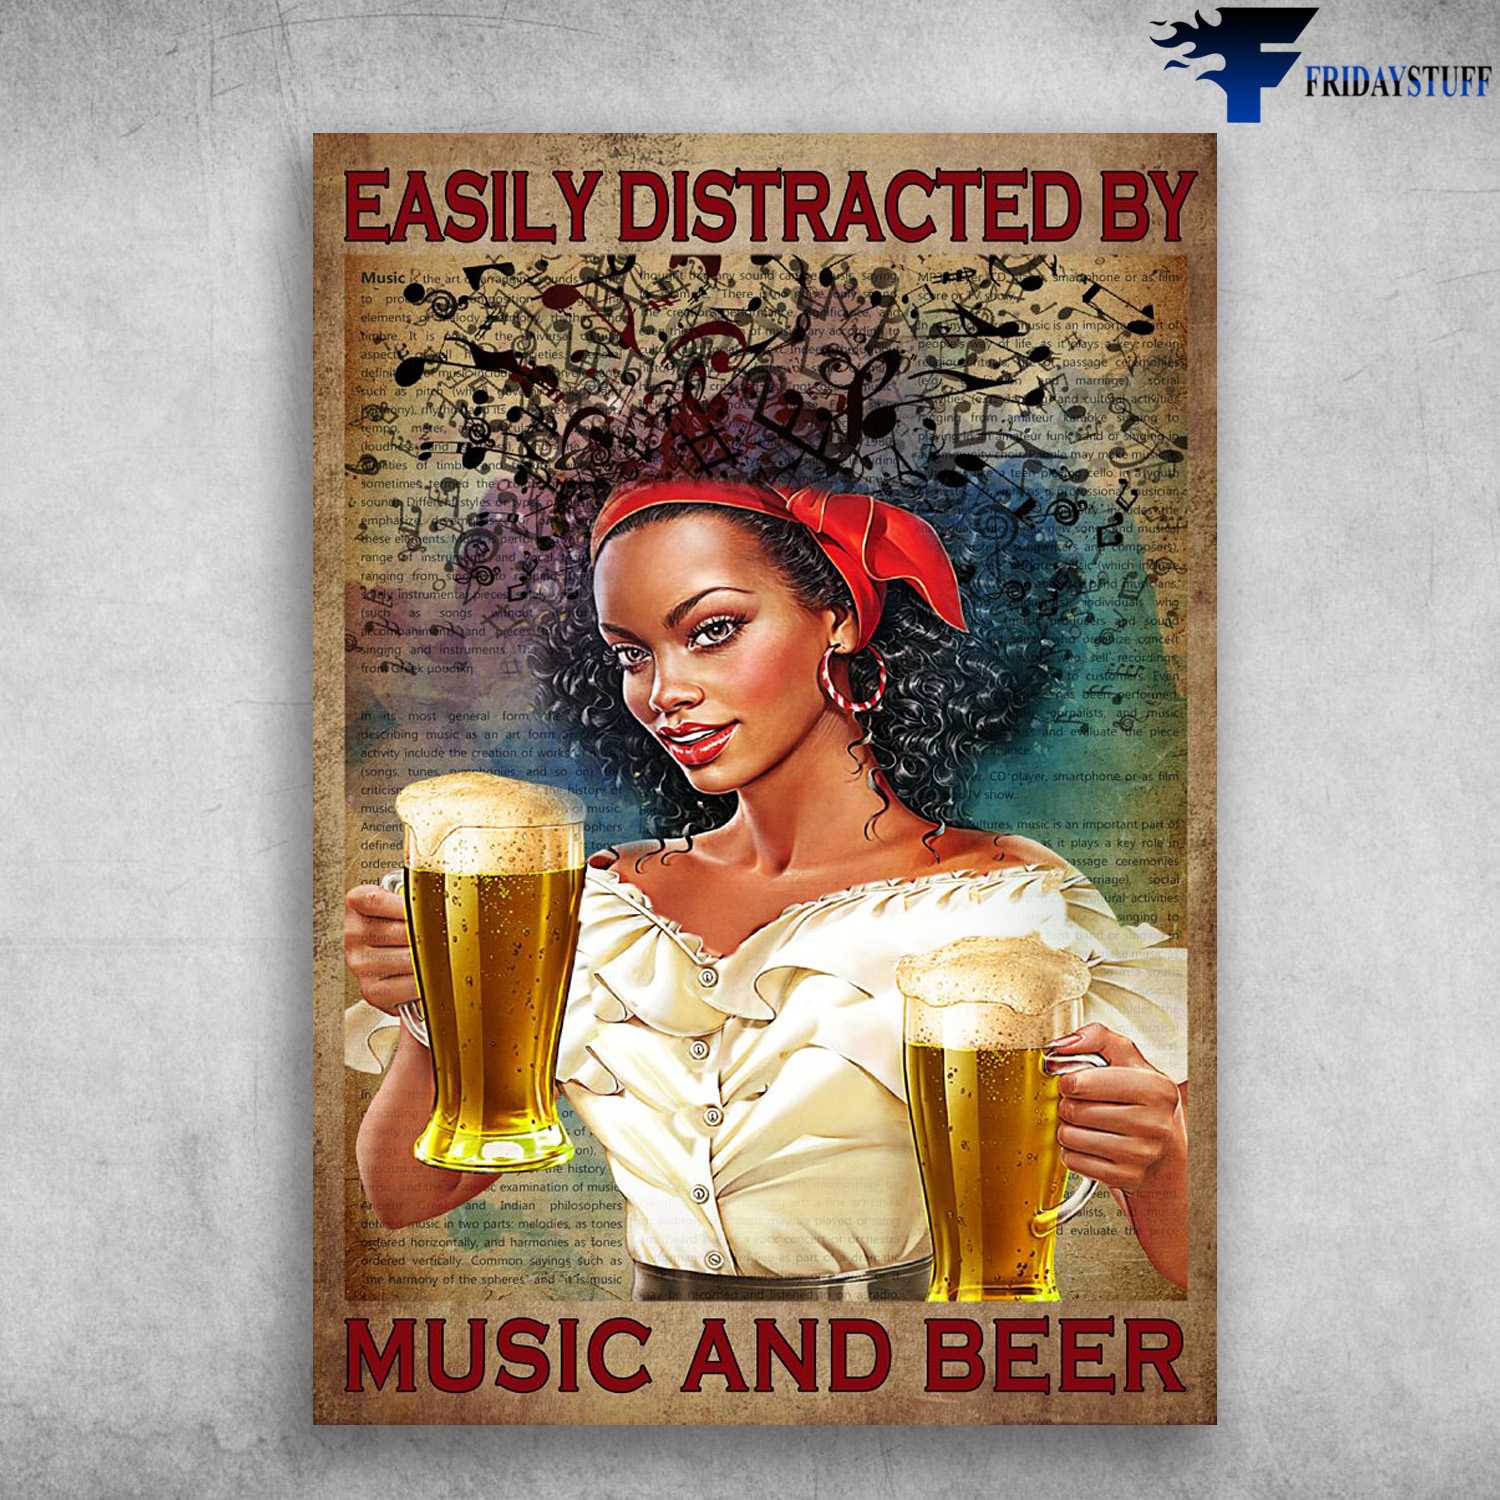 Music And Beer, Black Girl, Easily Distracted By, Music And Beer